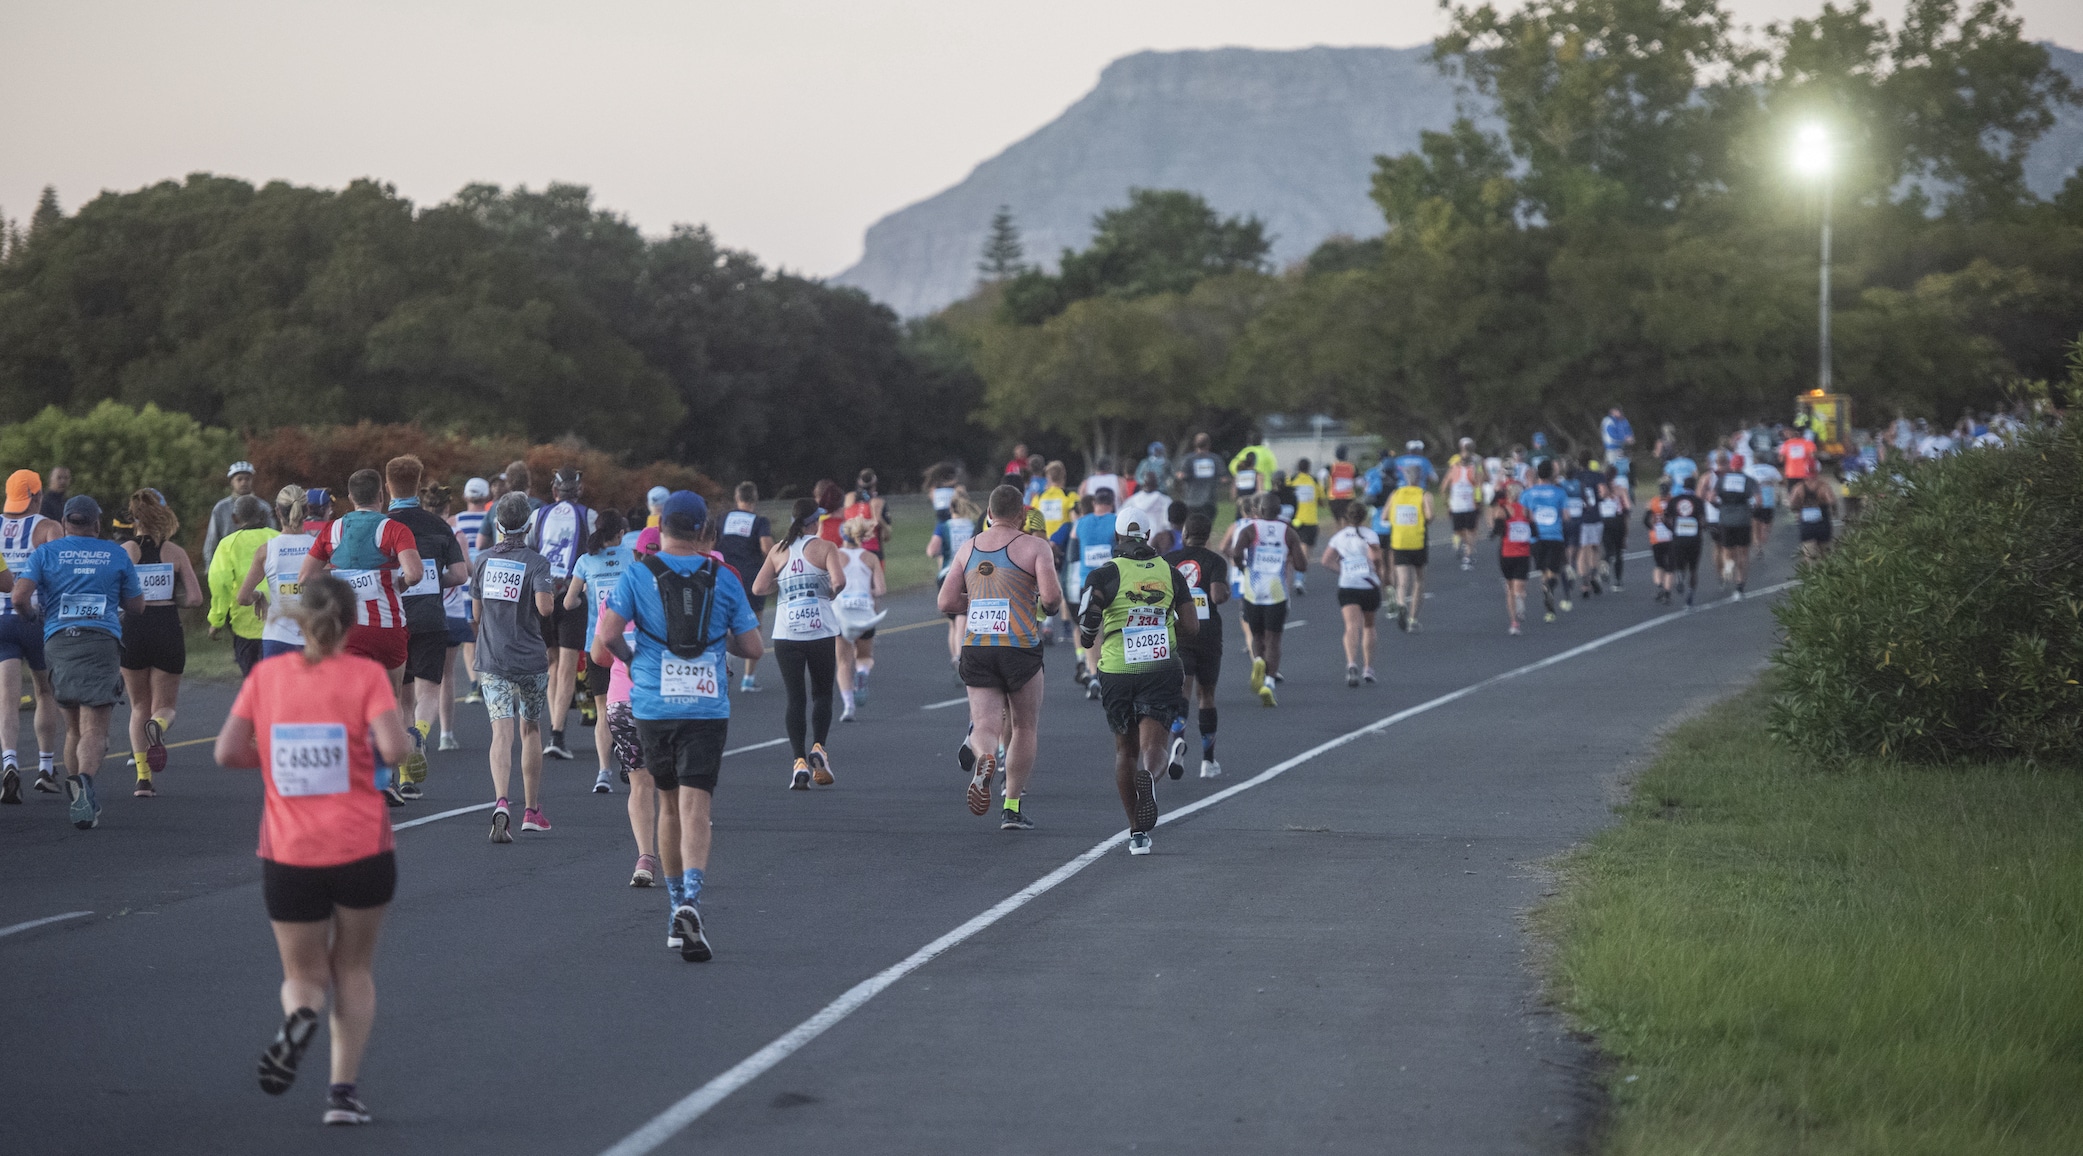 training to Survive your first half marathon at two oceans